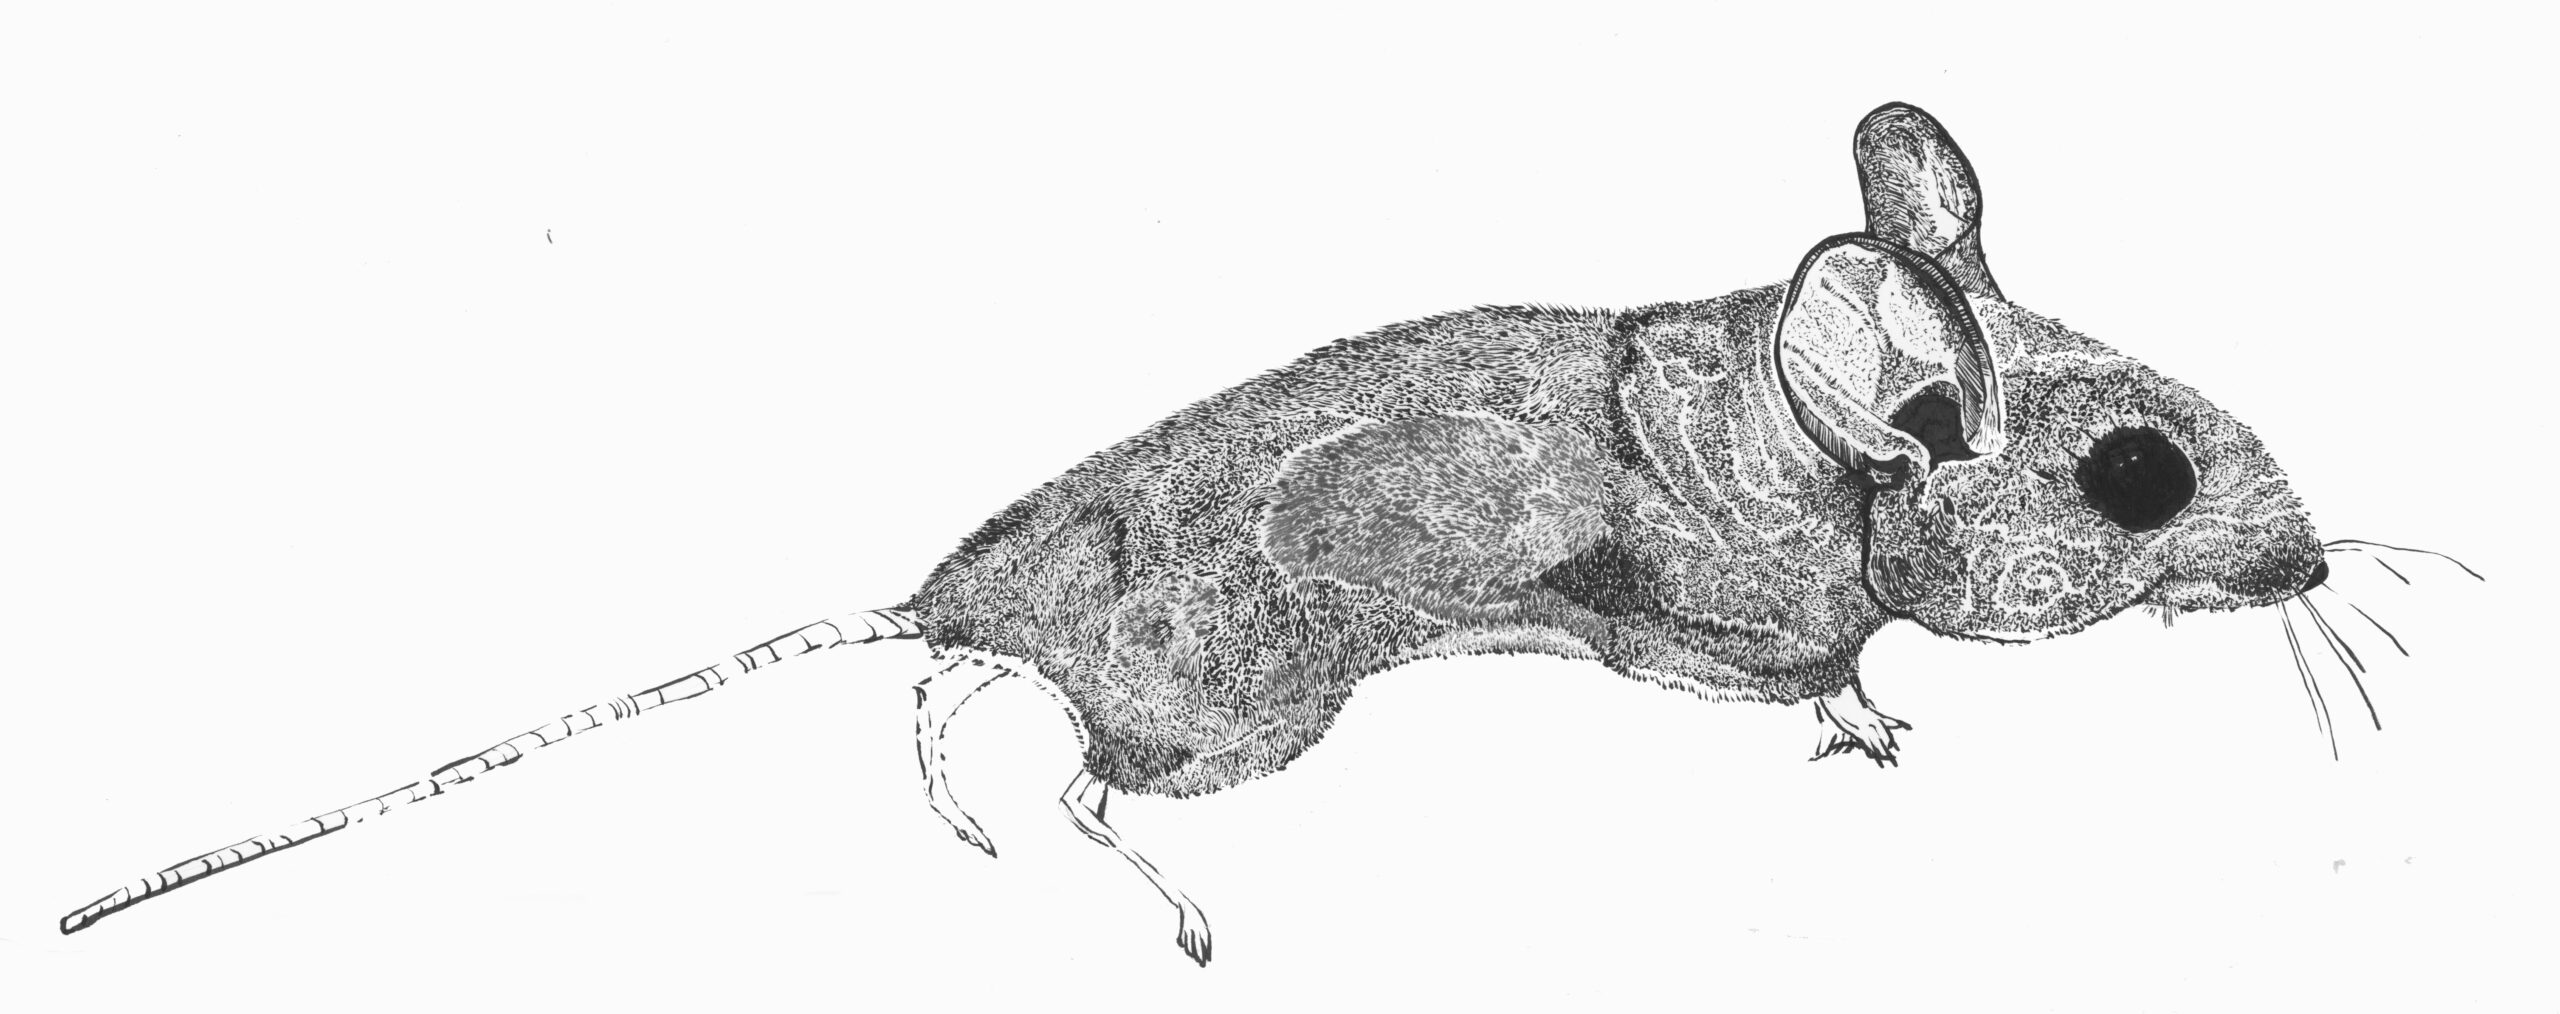 Black ink rendering of a mouse with fine stippling details.